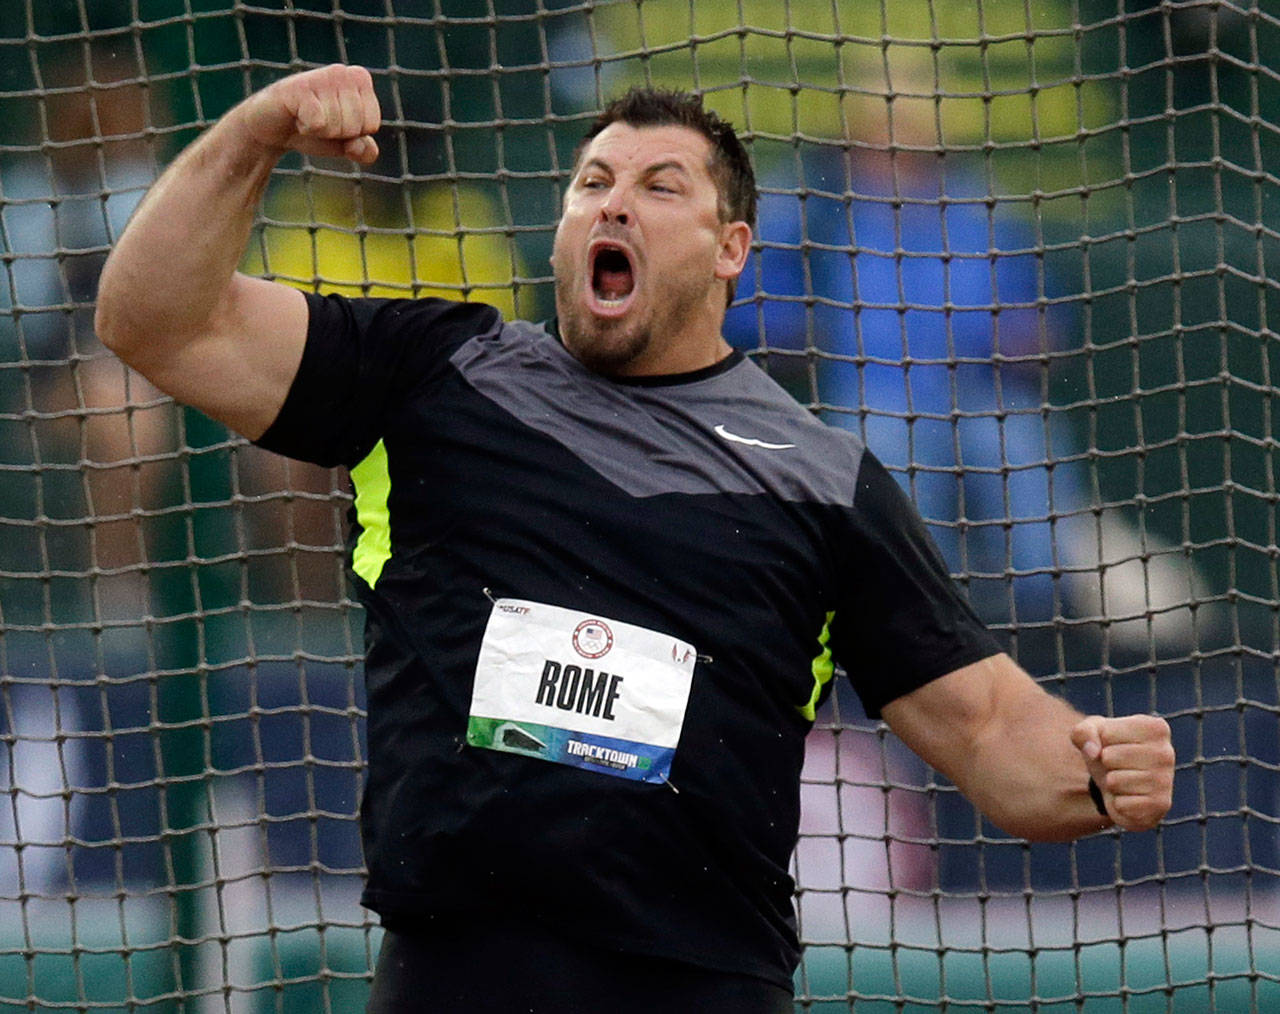 Jarred Rome, a Marysville Pilchuck alum, celebrates after the men’s discus final at the U.S. Olympic trials in 2012, in Eugene, Ore. Rome was named to the Snohomish County Sports Hall of Fame’s 2019 class on Tuesday. (AP Photo/Charlie Riedel)